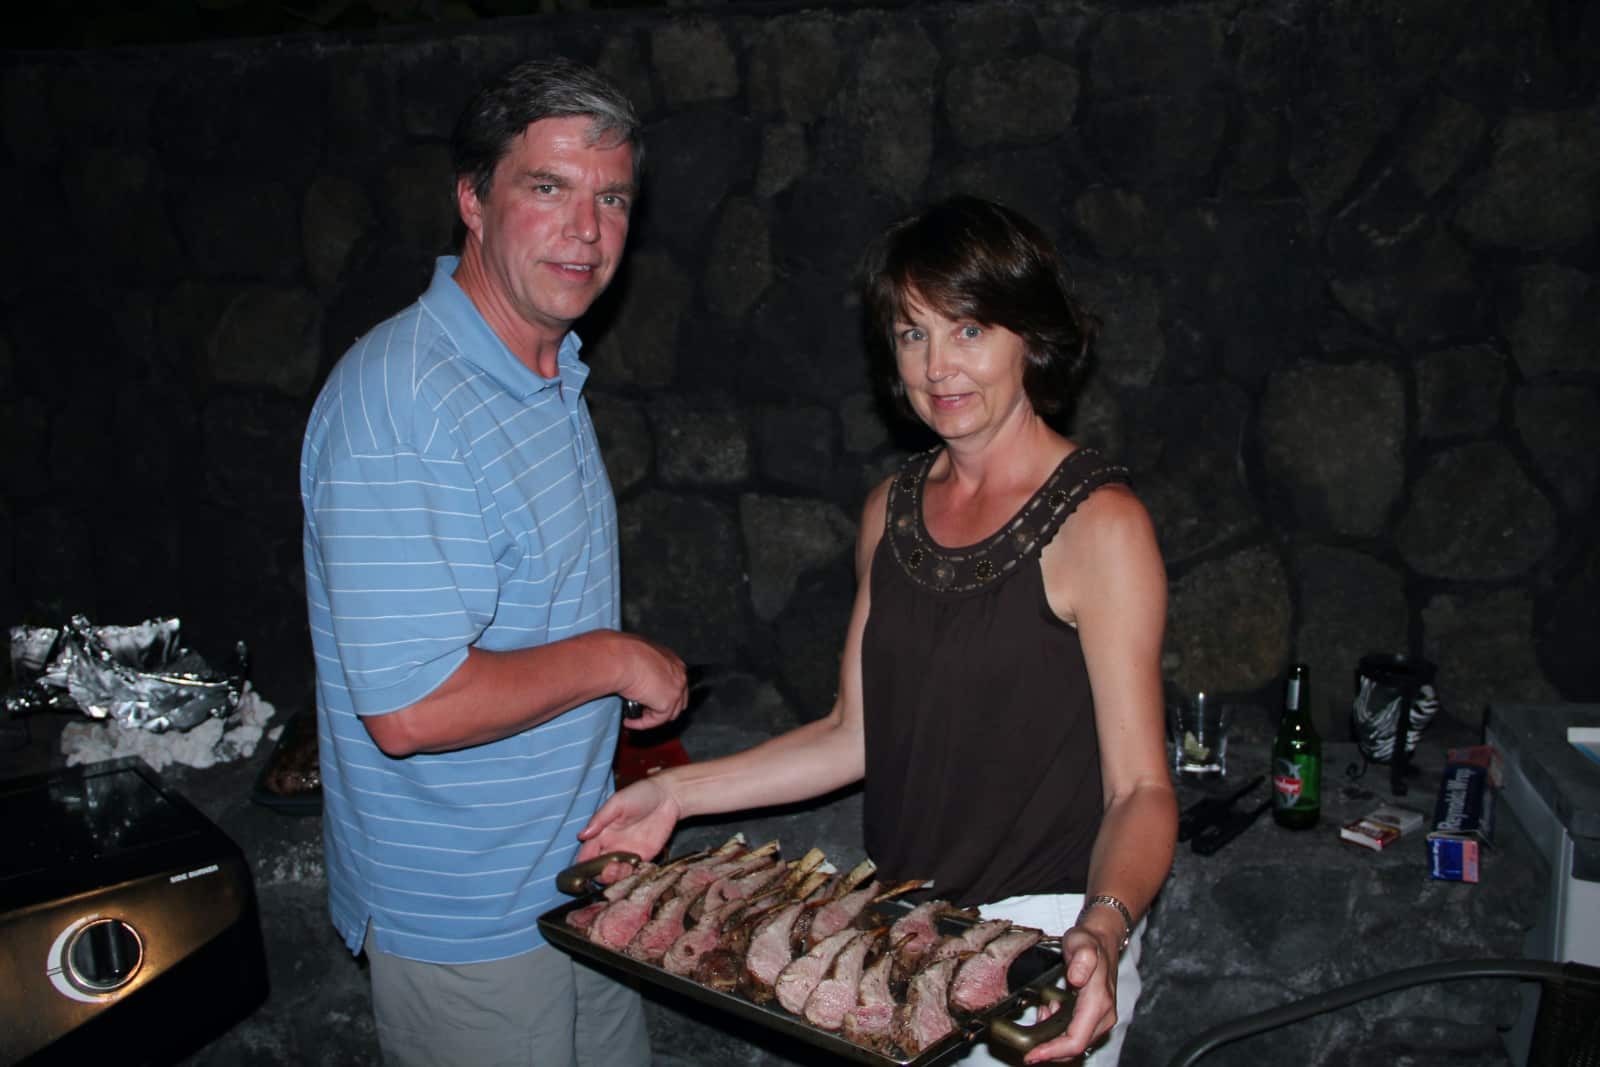 Man and woman posing with plate of red meat